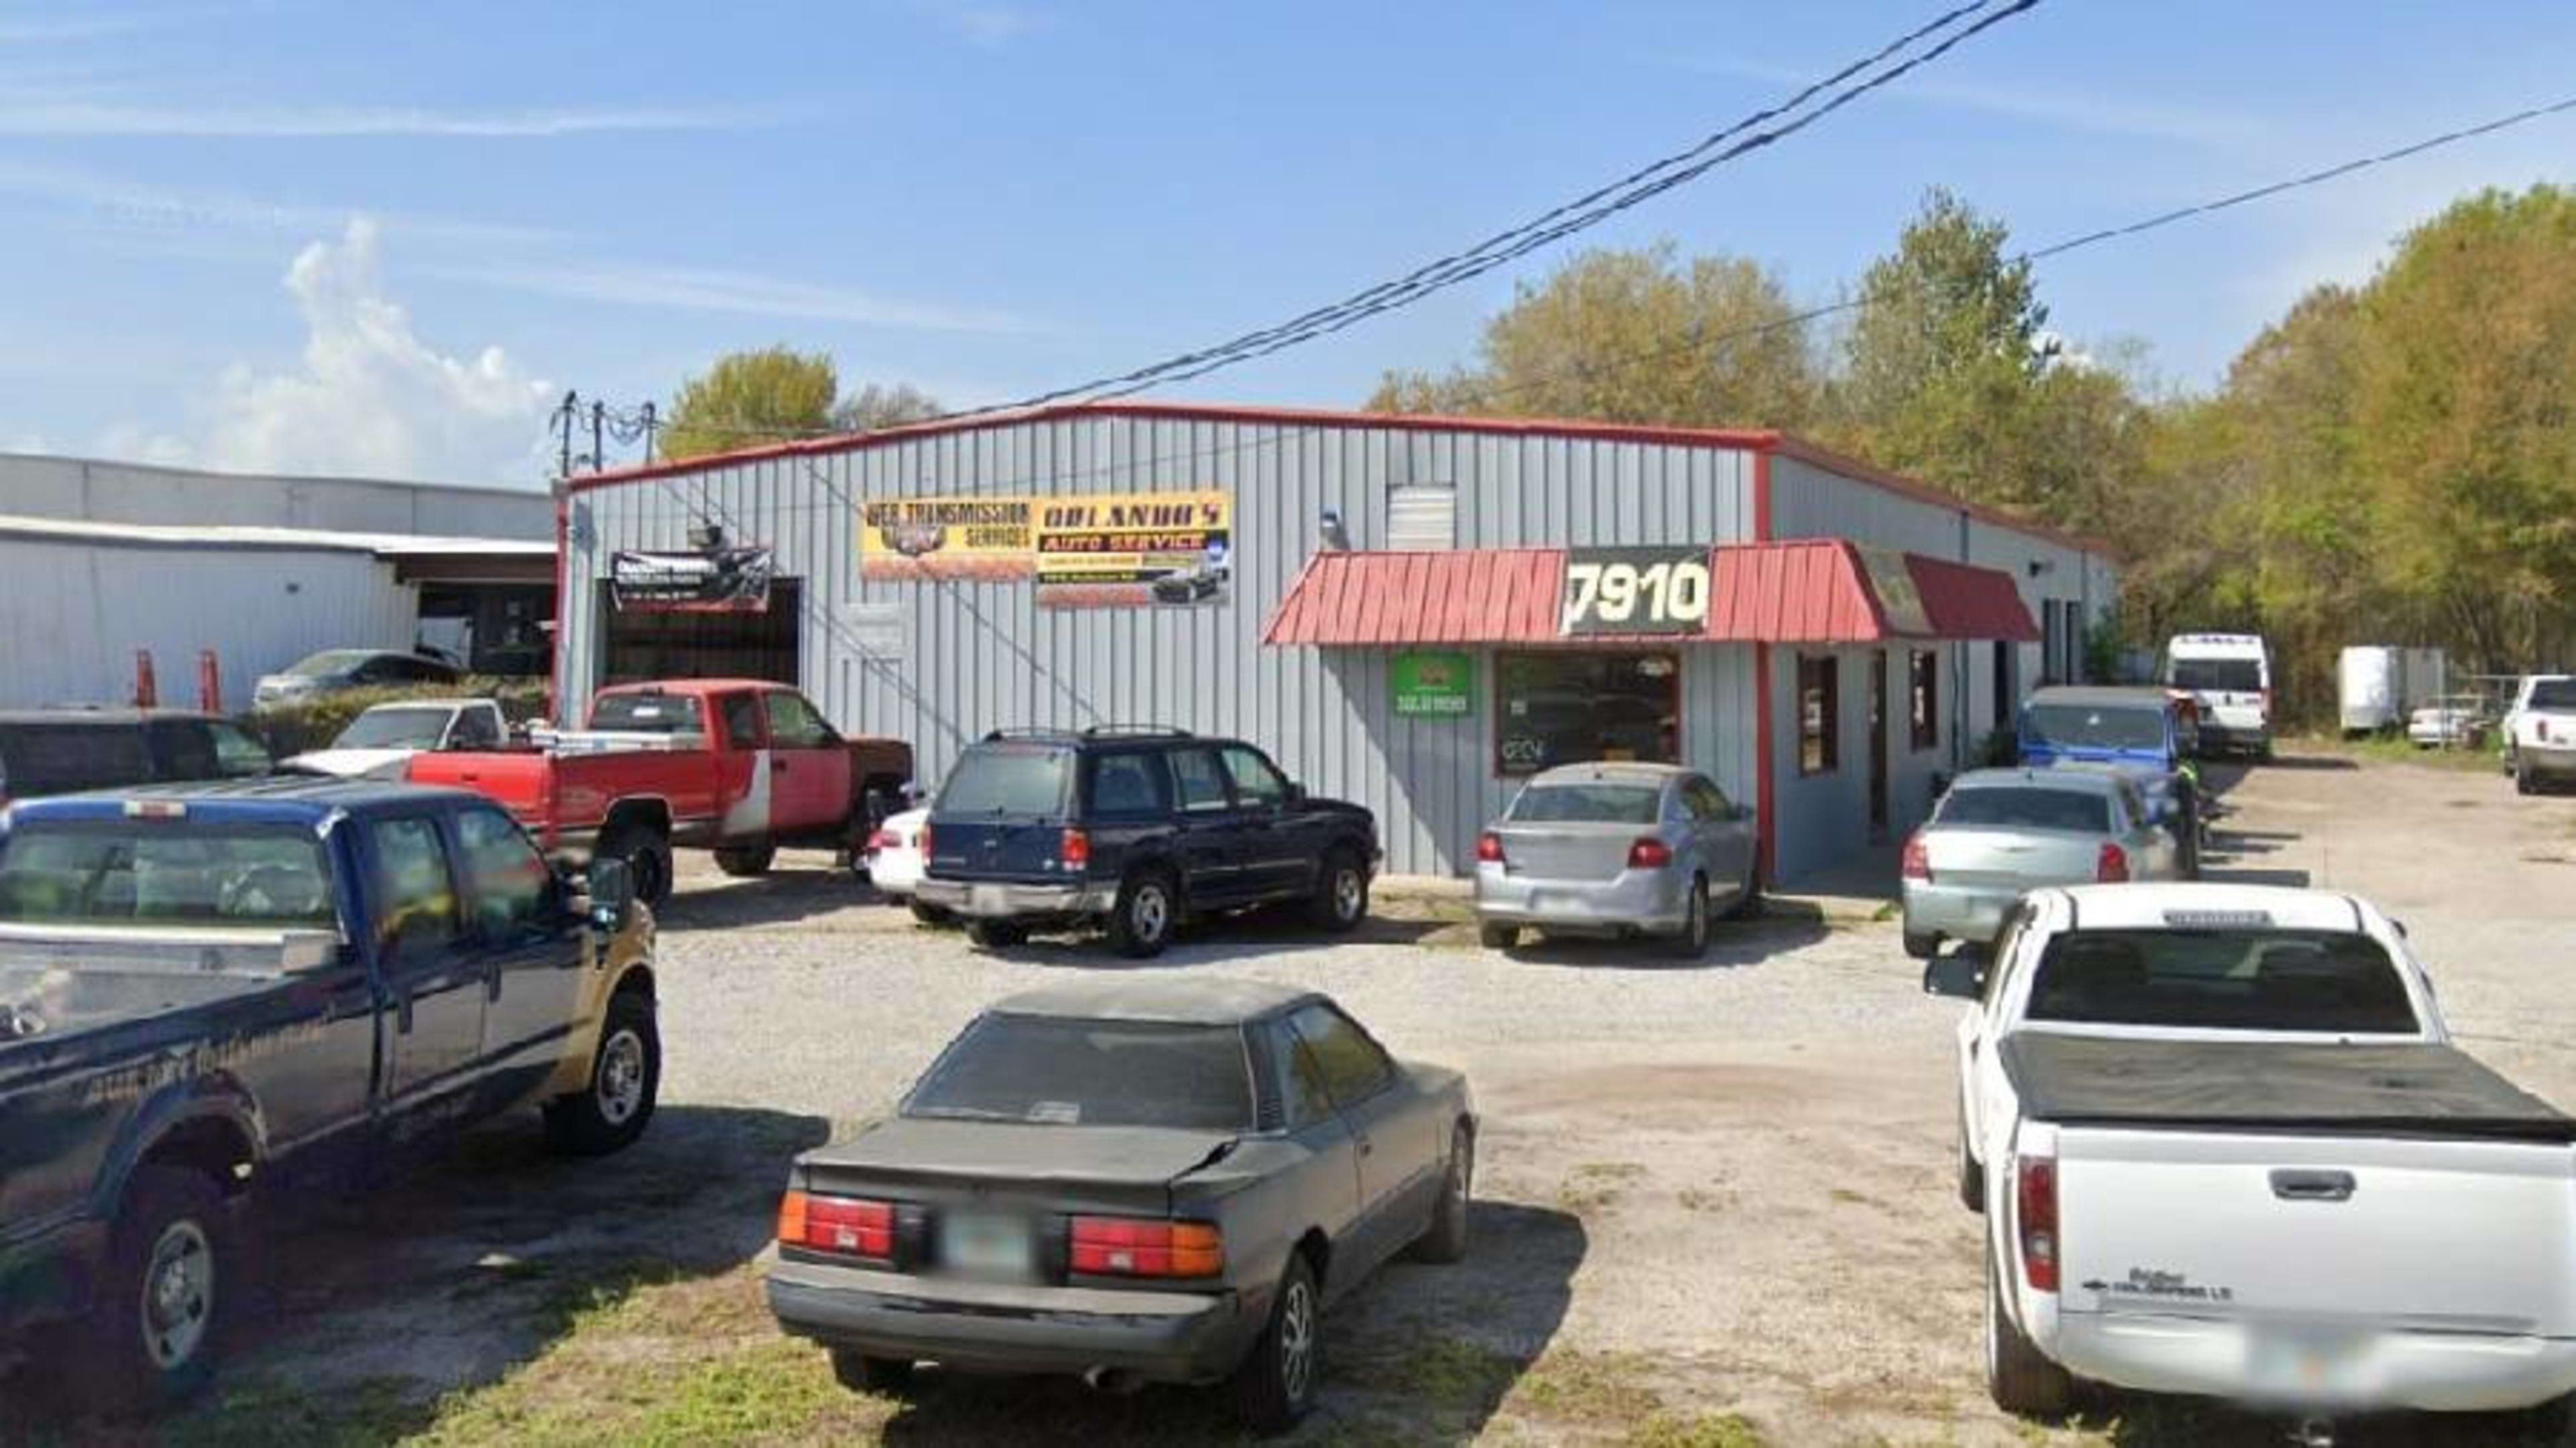 TIM'S CUSTOM CARS INC in Tampa, FL (7910 Anderson Rd): Tire Shop me SimpleTire